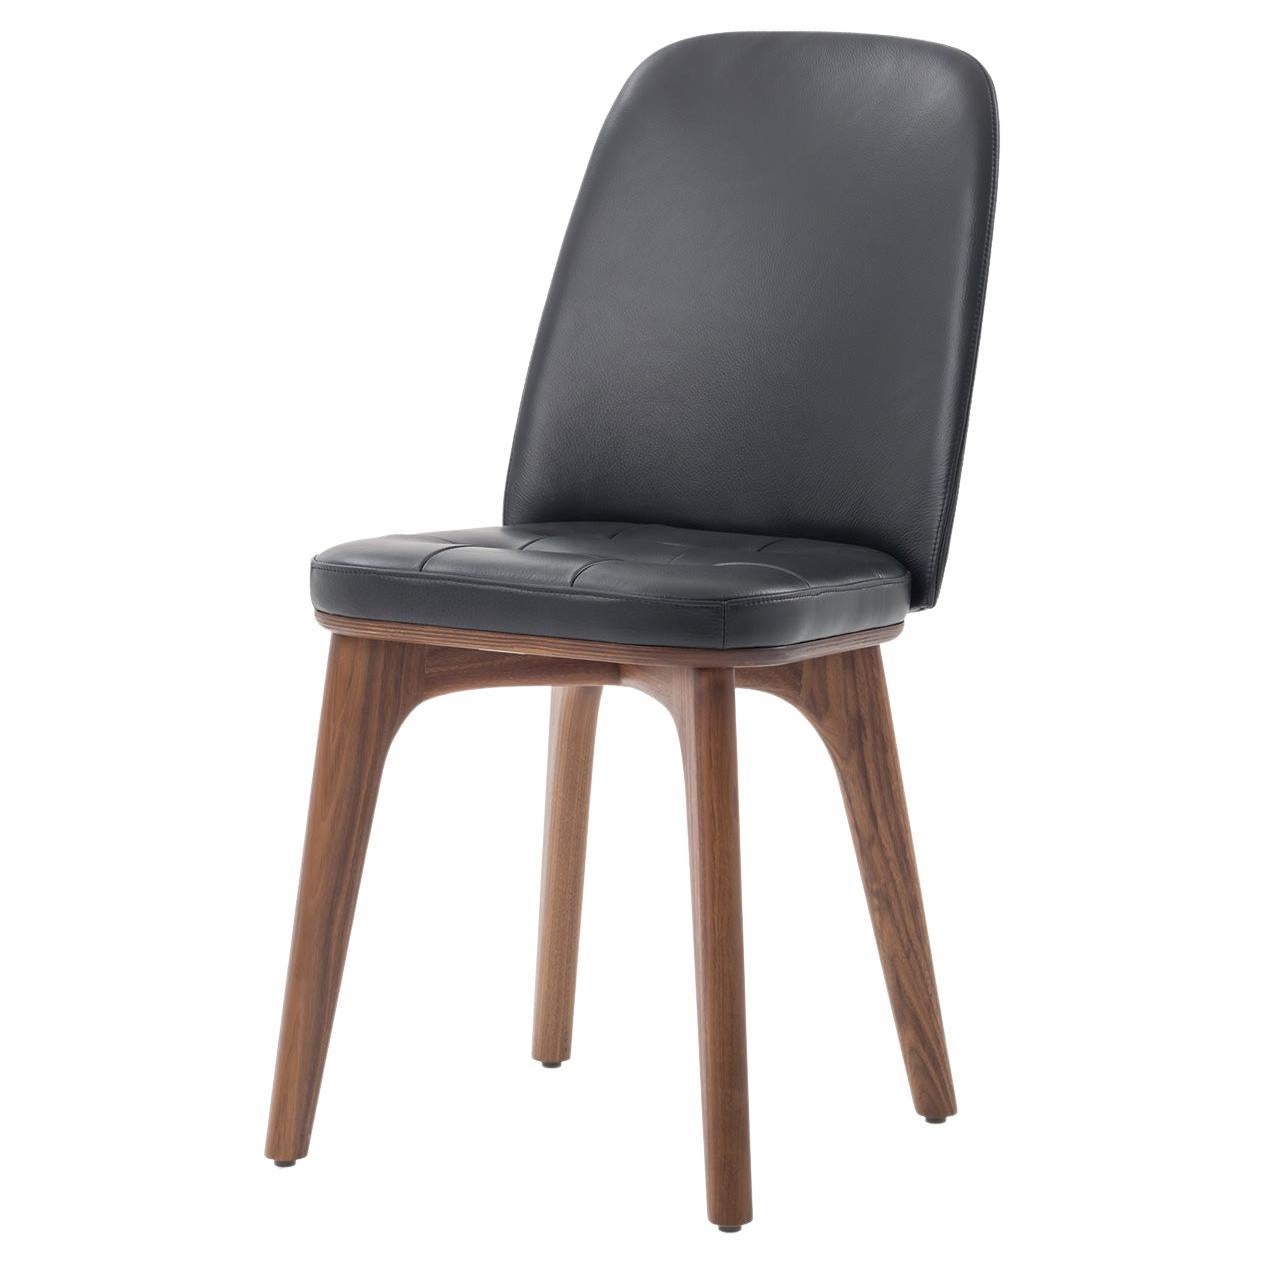 Walnut Stained Ash and Caress Black Leather Highback Chair, Utility